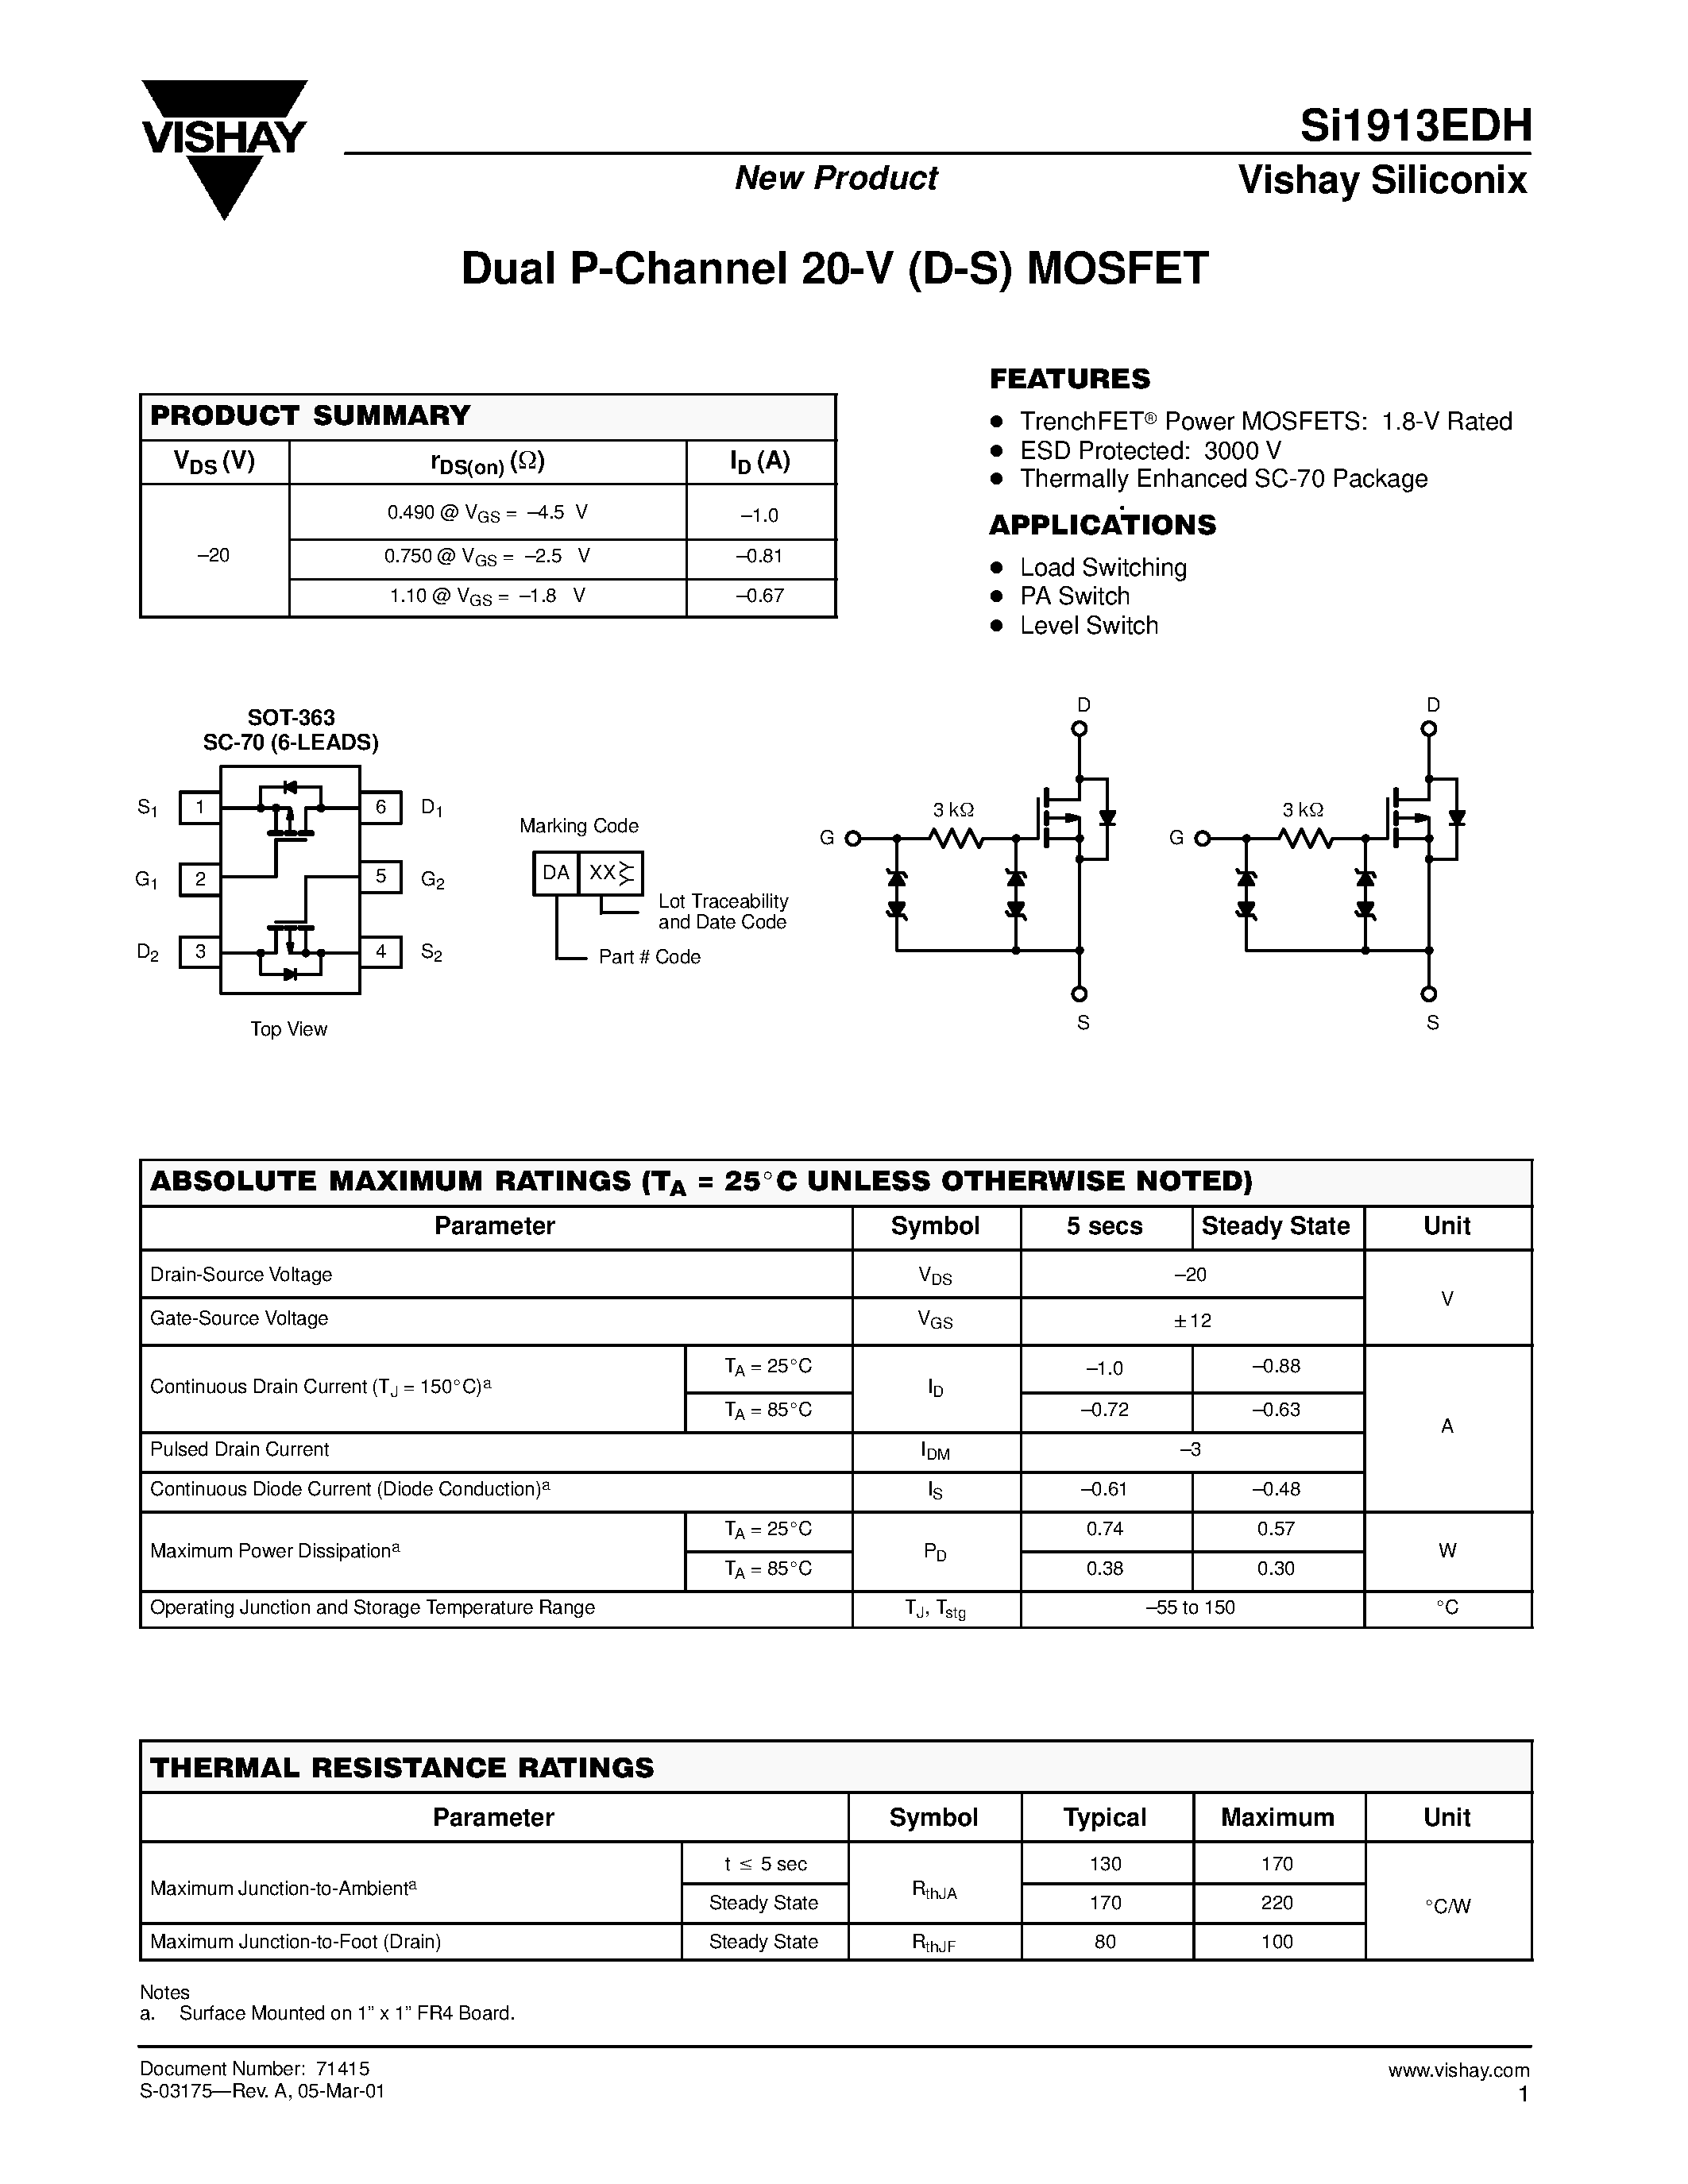 Даташит SI1913EDH - Dual P-Channel 20-V (D-S) MOSFET страница 1